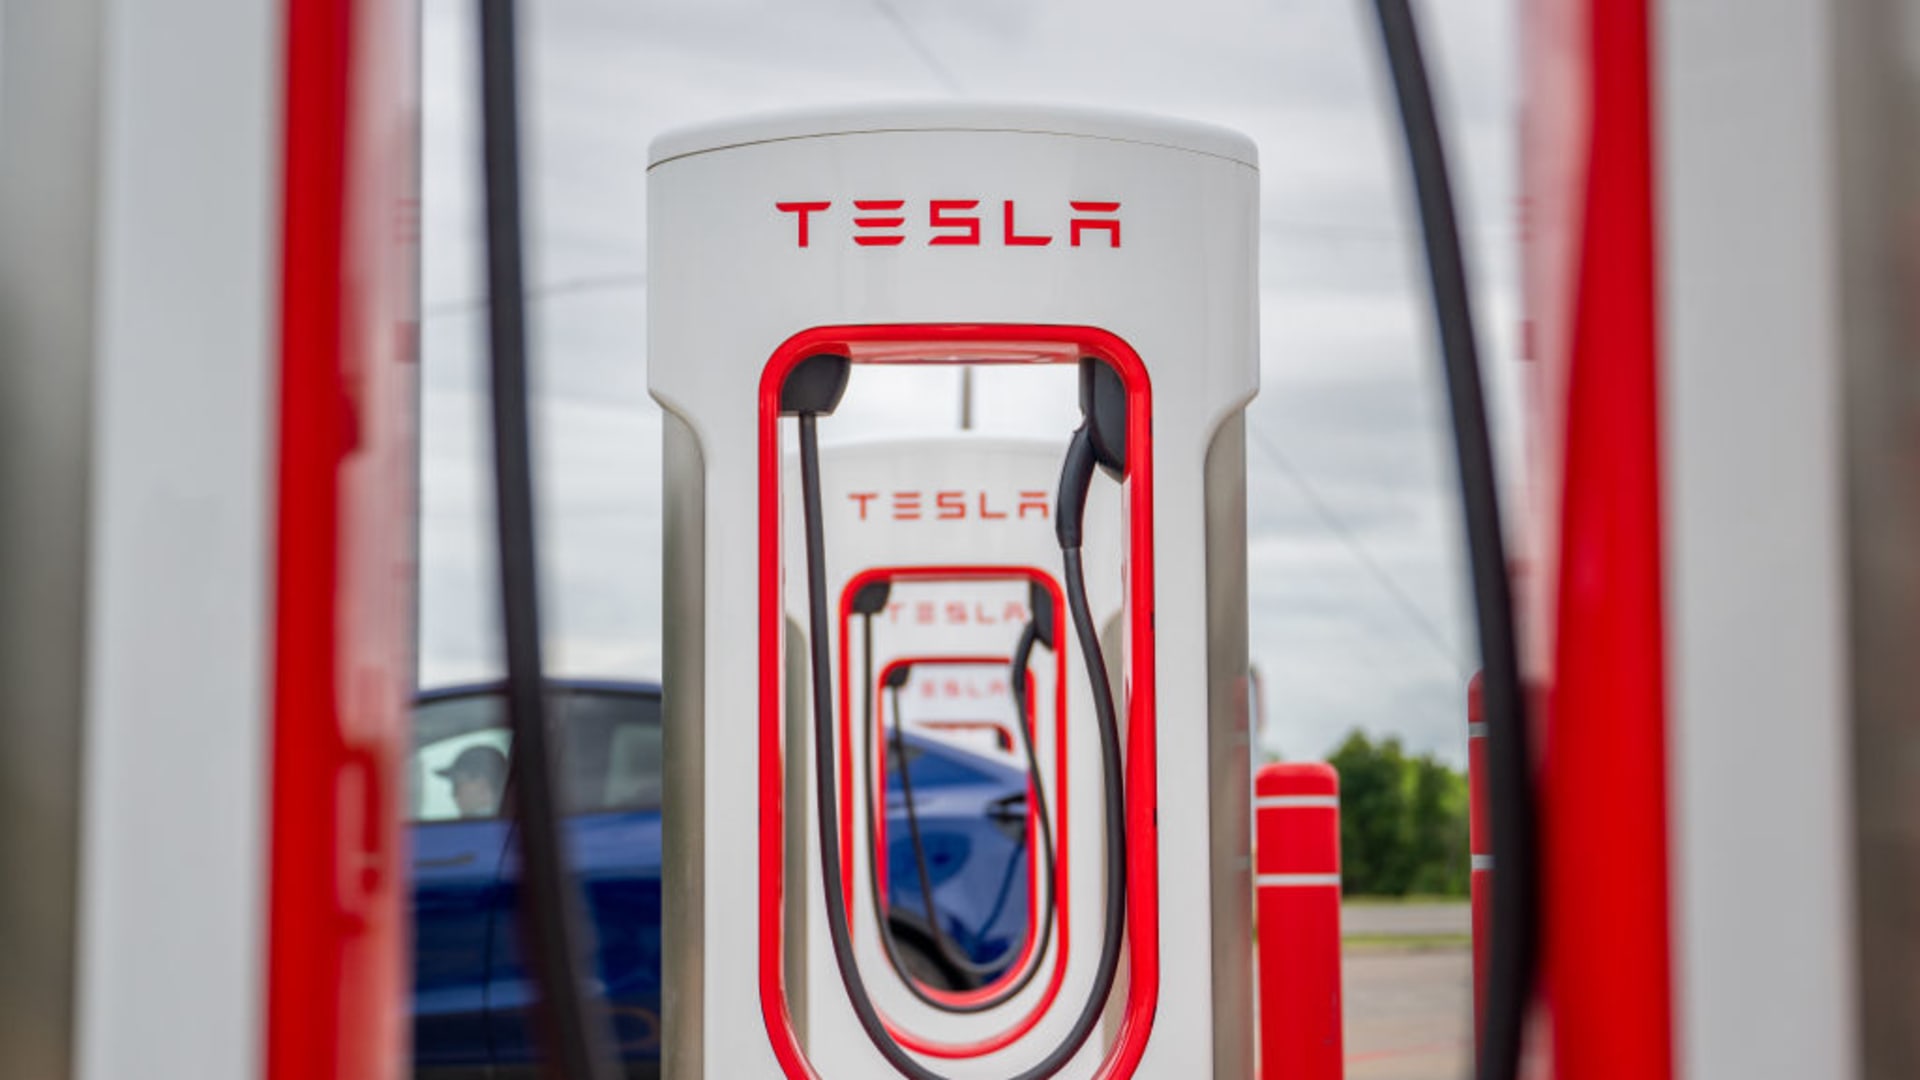 Tesla shares drop nearly 6% after Musk cuts about 500 jobs in Supercharger team Auto Recent